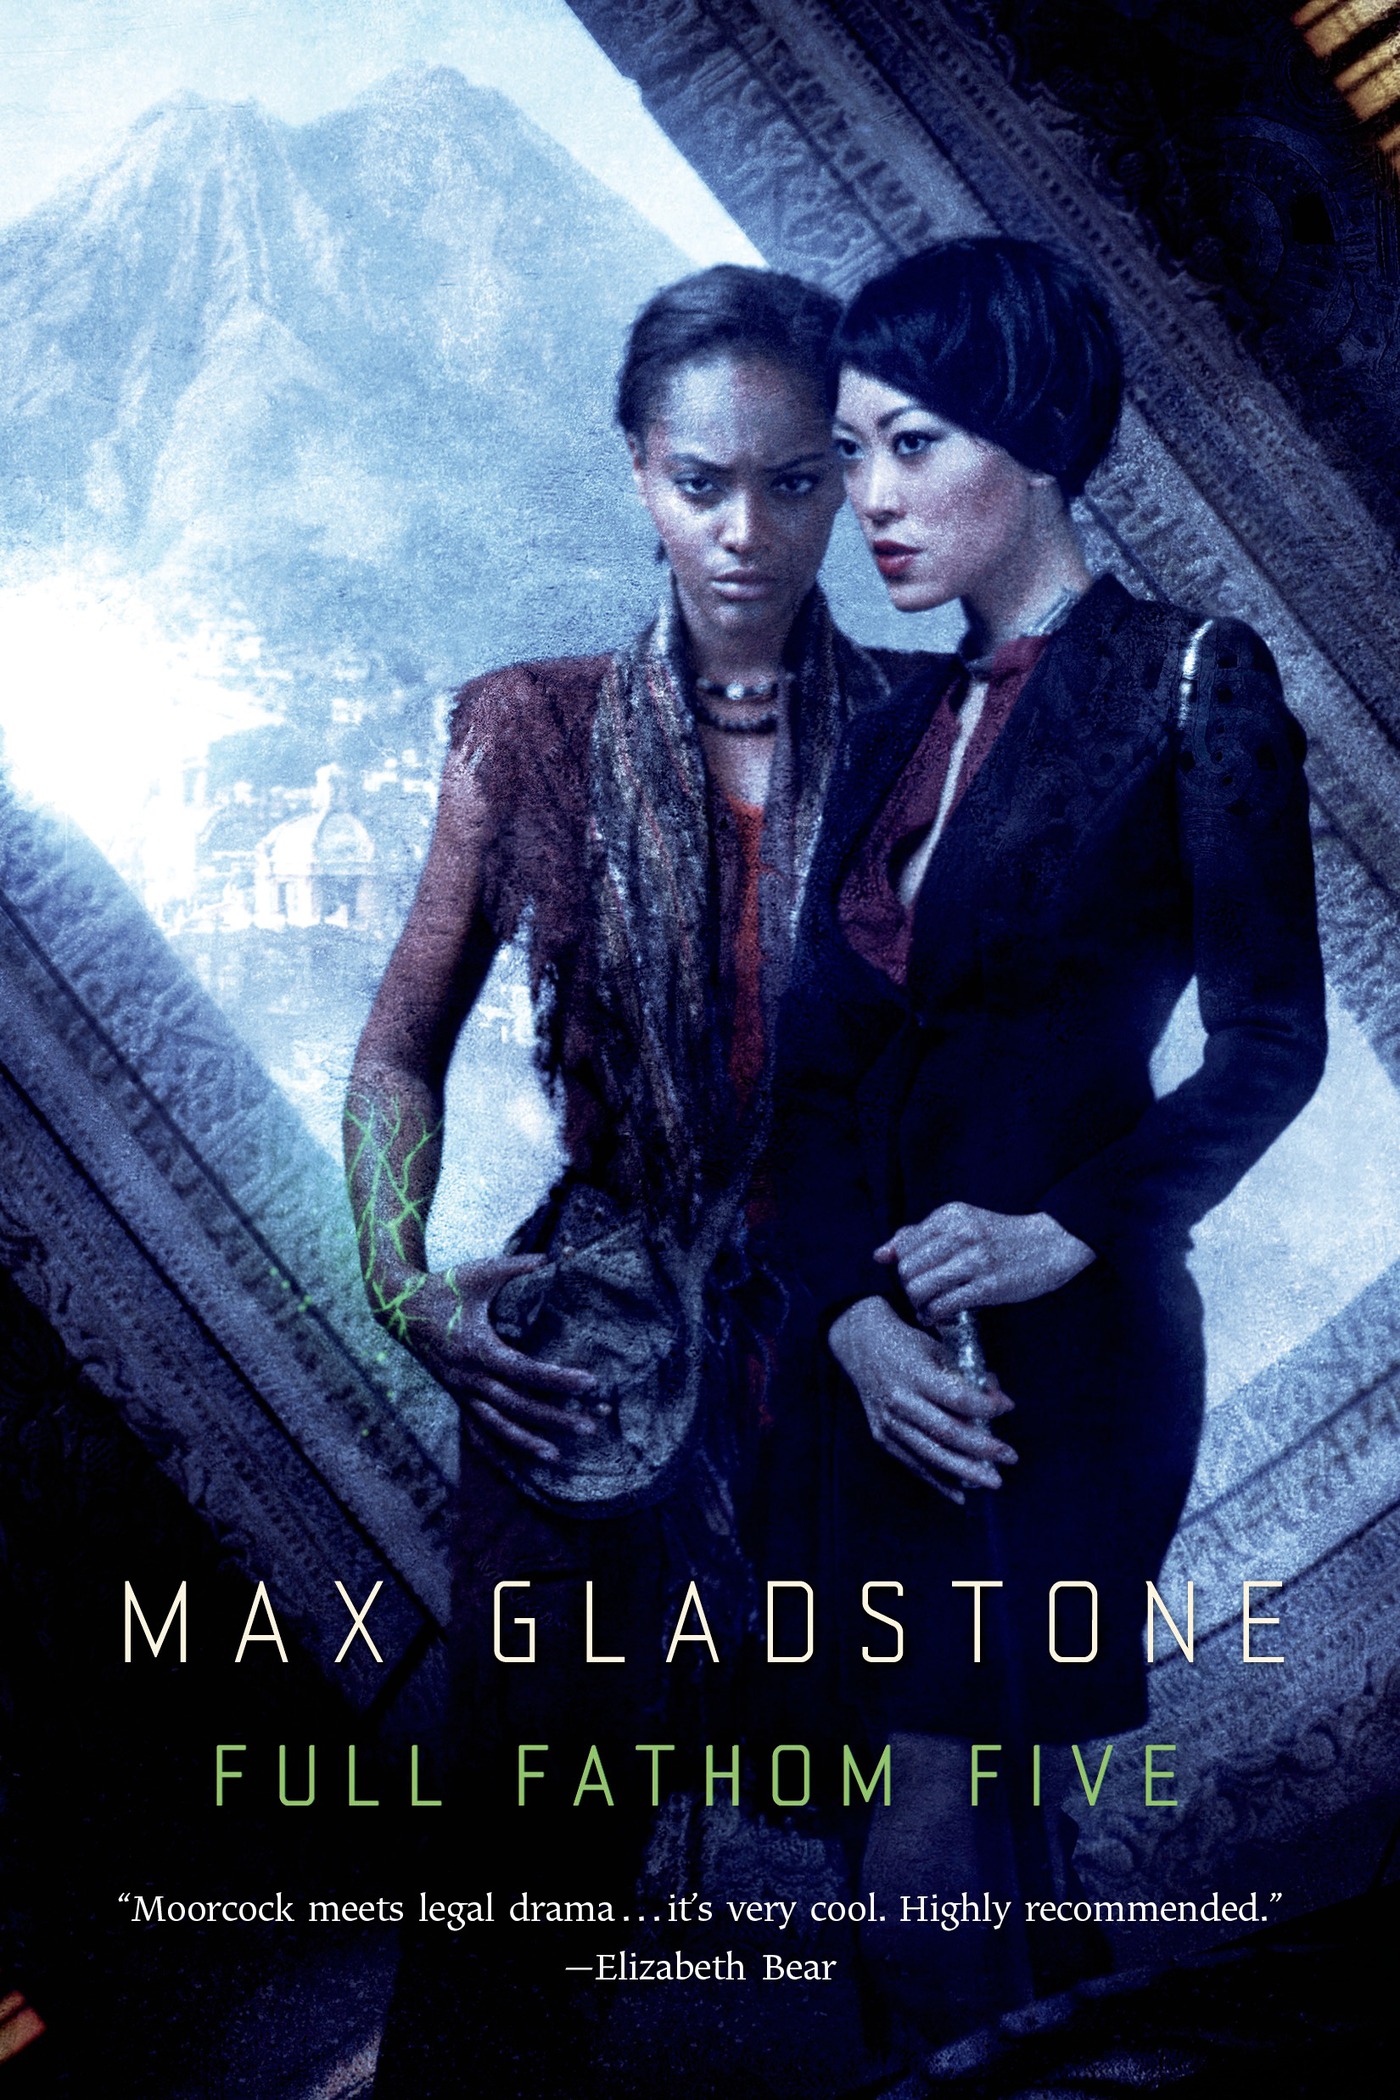 Full Fathom Five : A Novel of the Craft Sequence by Max Gladstone